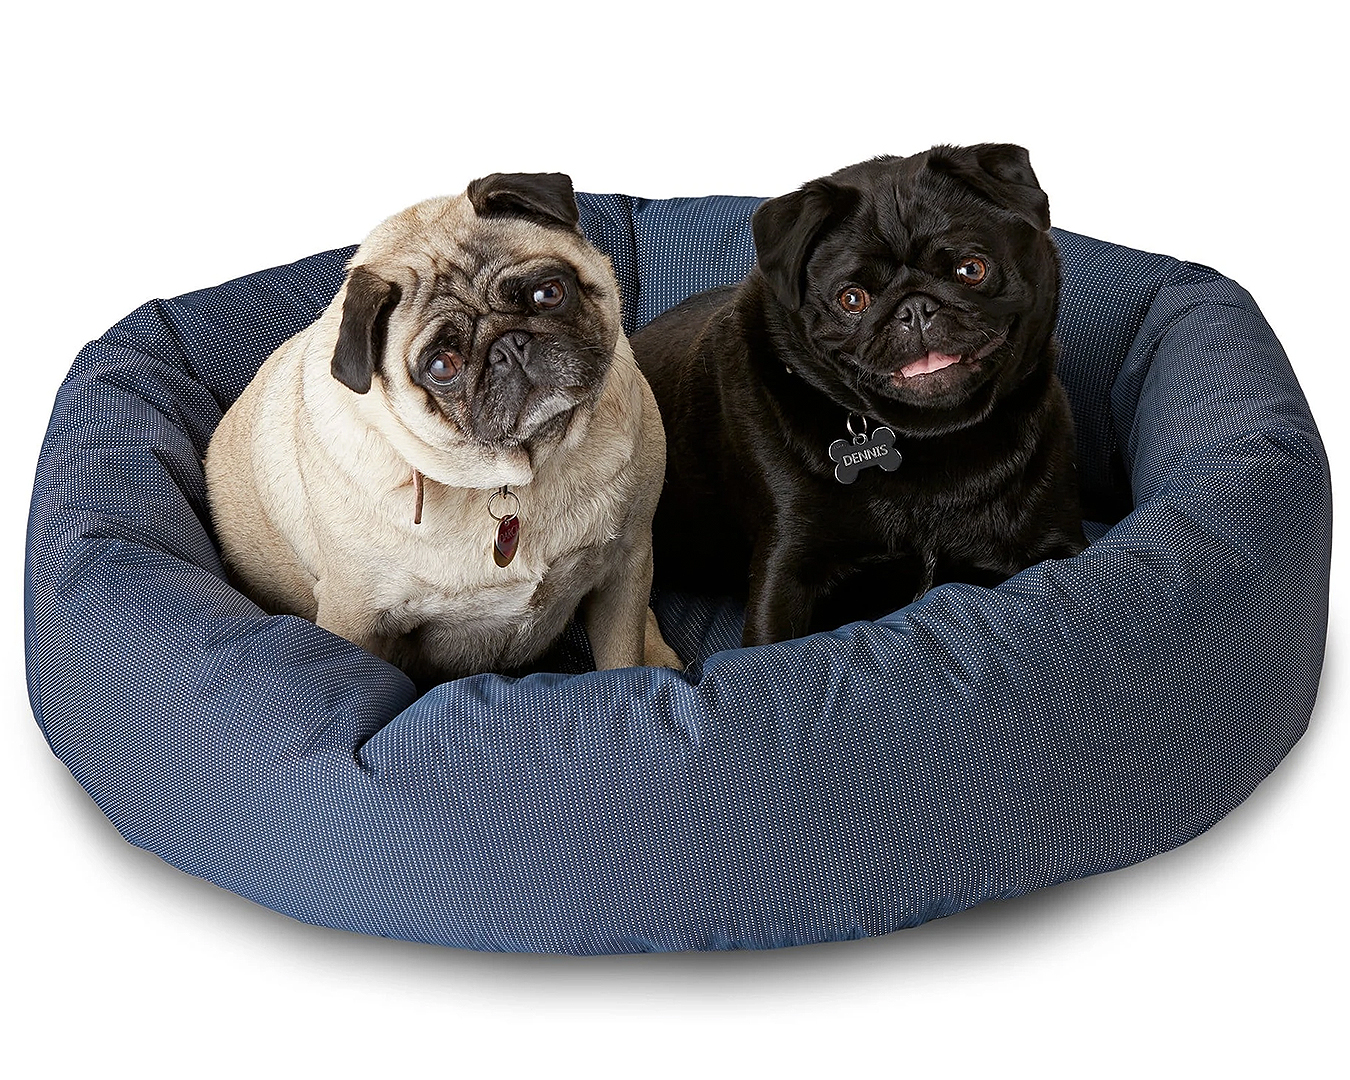 This tough cover calming bed is great for puppies, these two pugs look stoked.